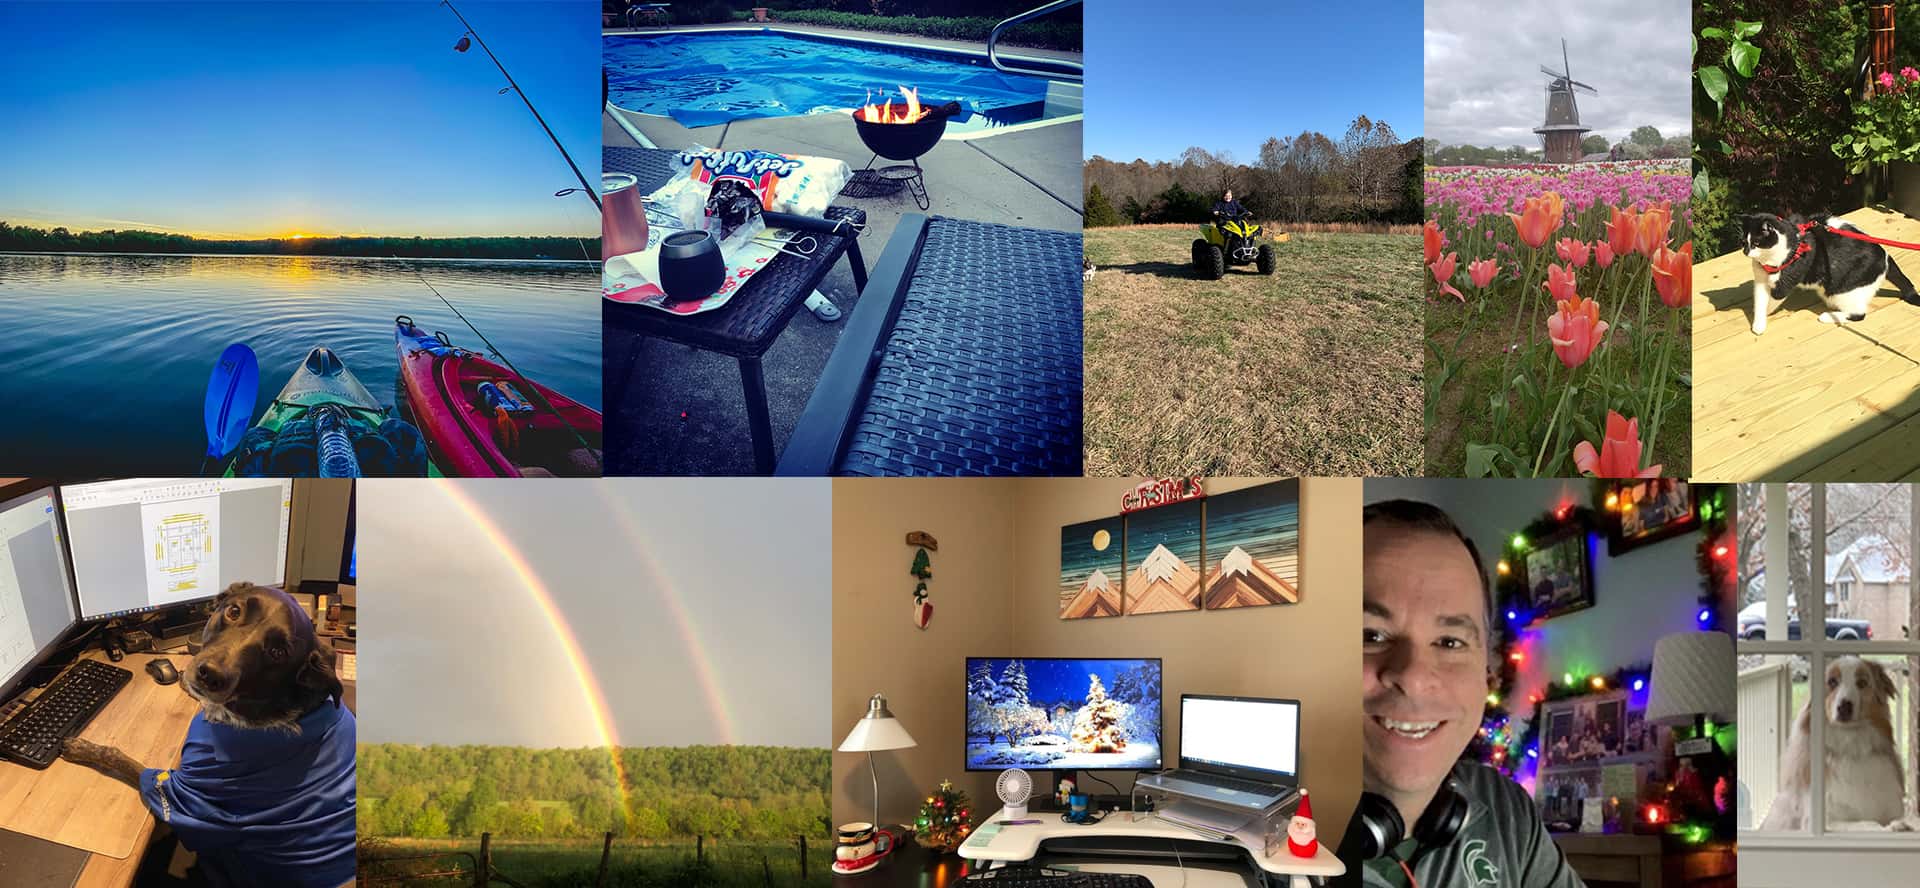 A nostalgic collage of photos, capturing the year 2020, with a vibrant rainbow at its core.